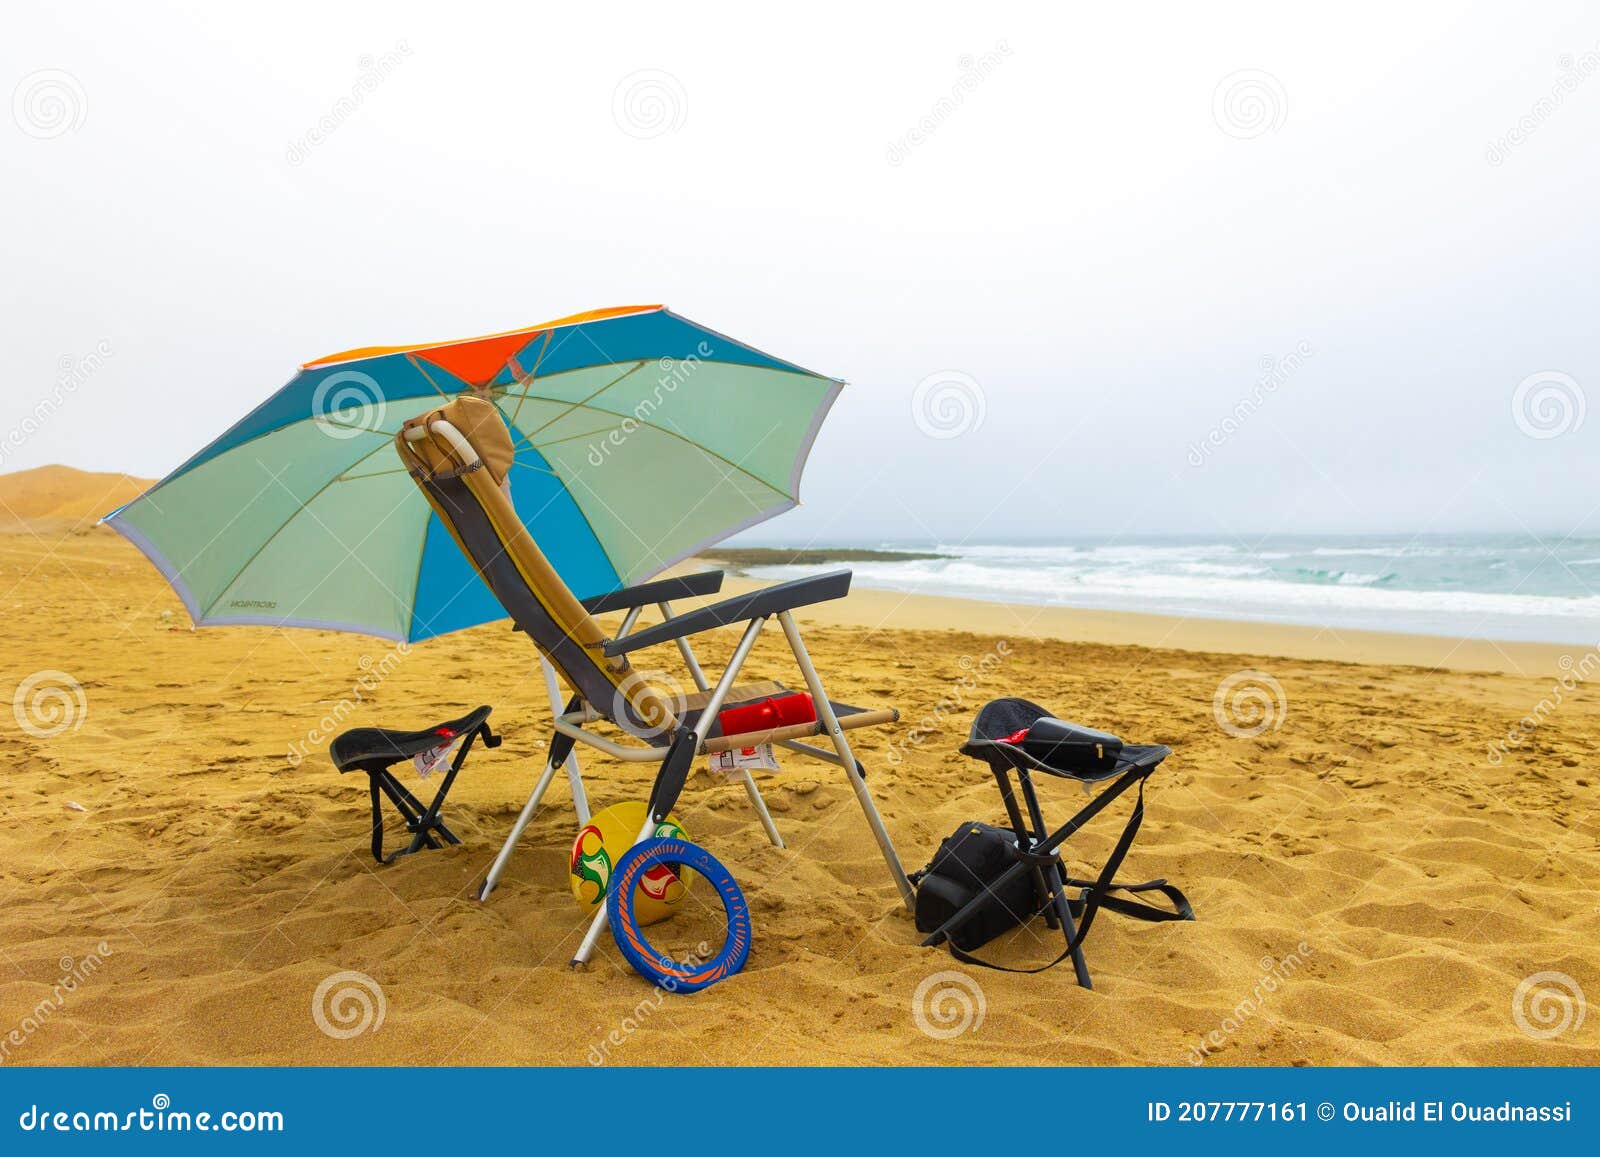 Beach Decathlon Umbrella, Quechua Chairs, a Freesbe and a JBL Flip 4 Hight Speaker Editorial Photo - Image of chilling, invertebrate: